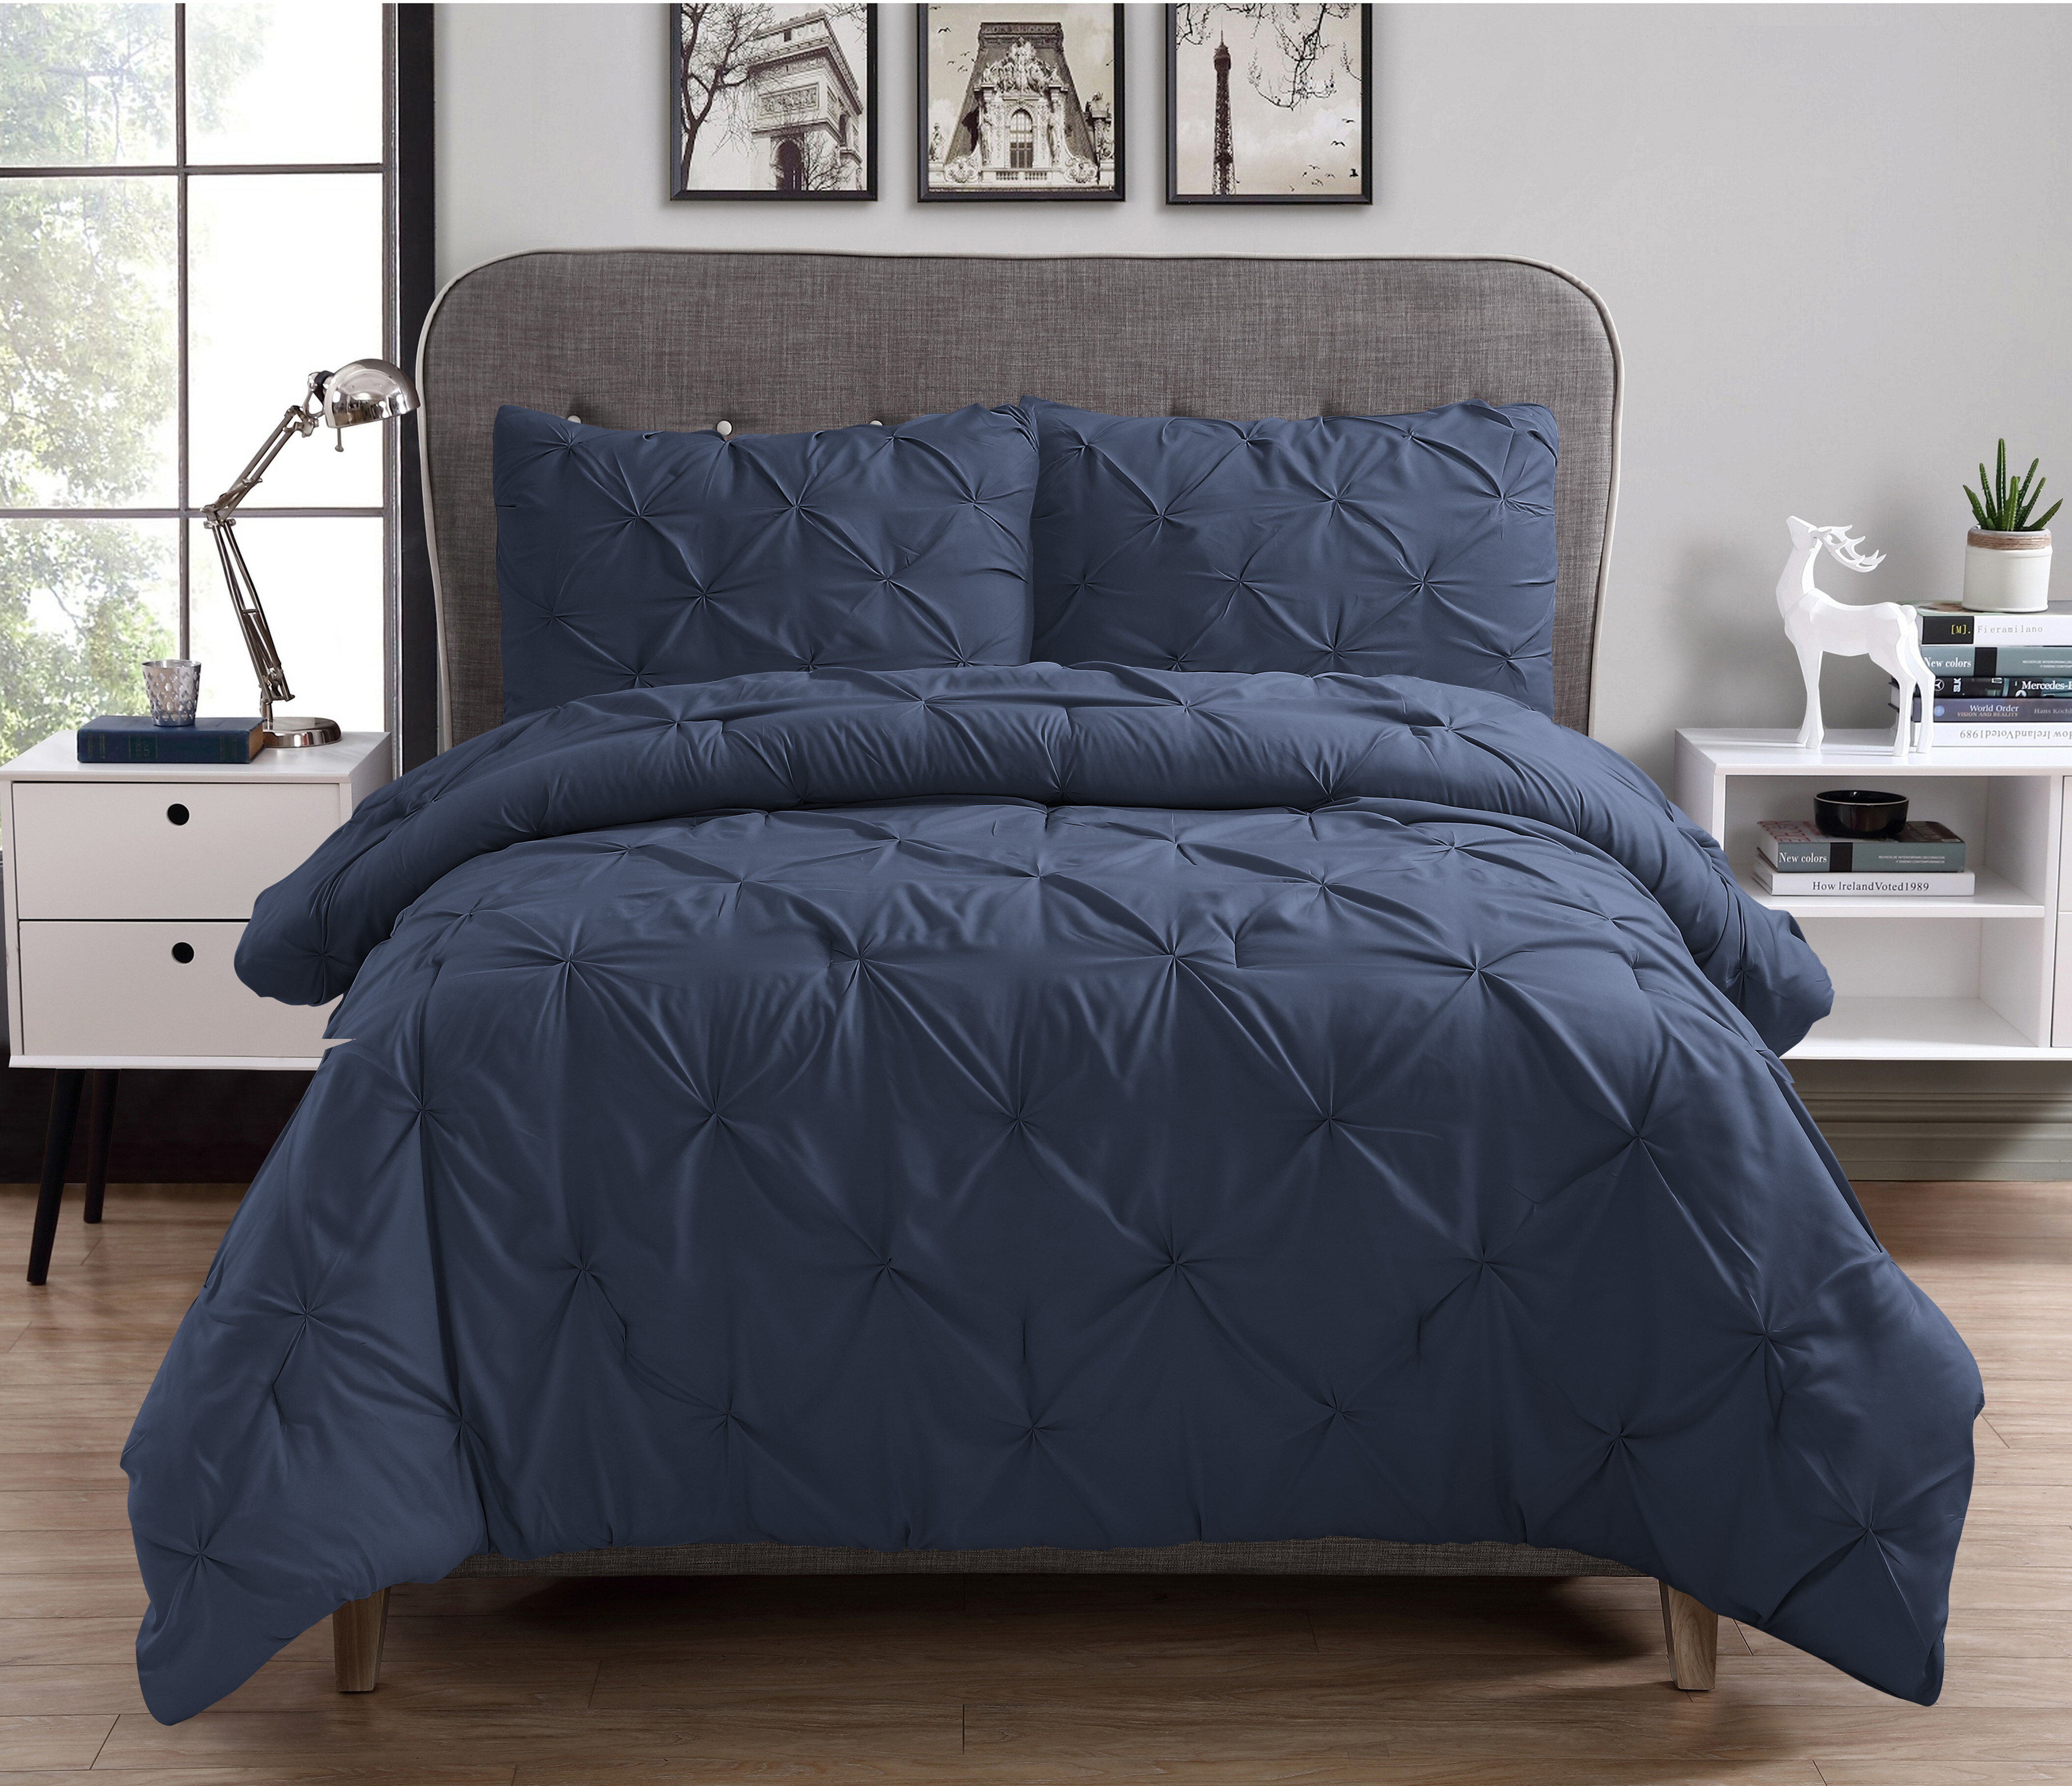 Linen Comforter Blue Filled With Cotton Filing Sofa Blanket Blanket Hand Quilted Quilt Handmade Navy Deep Blue Solid